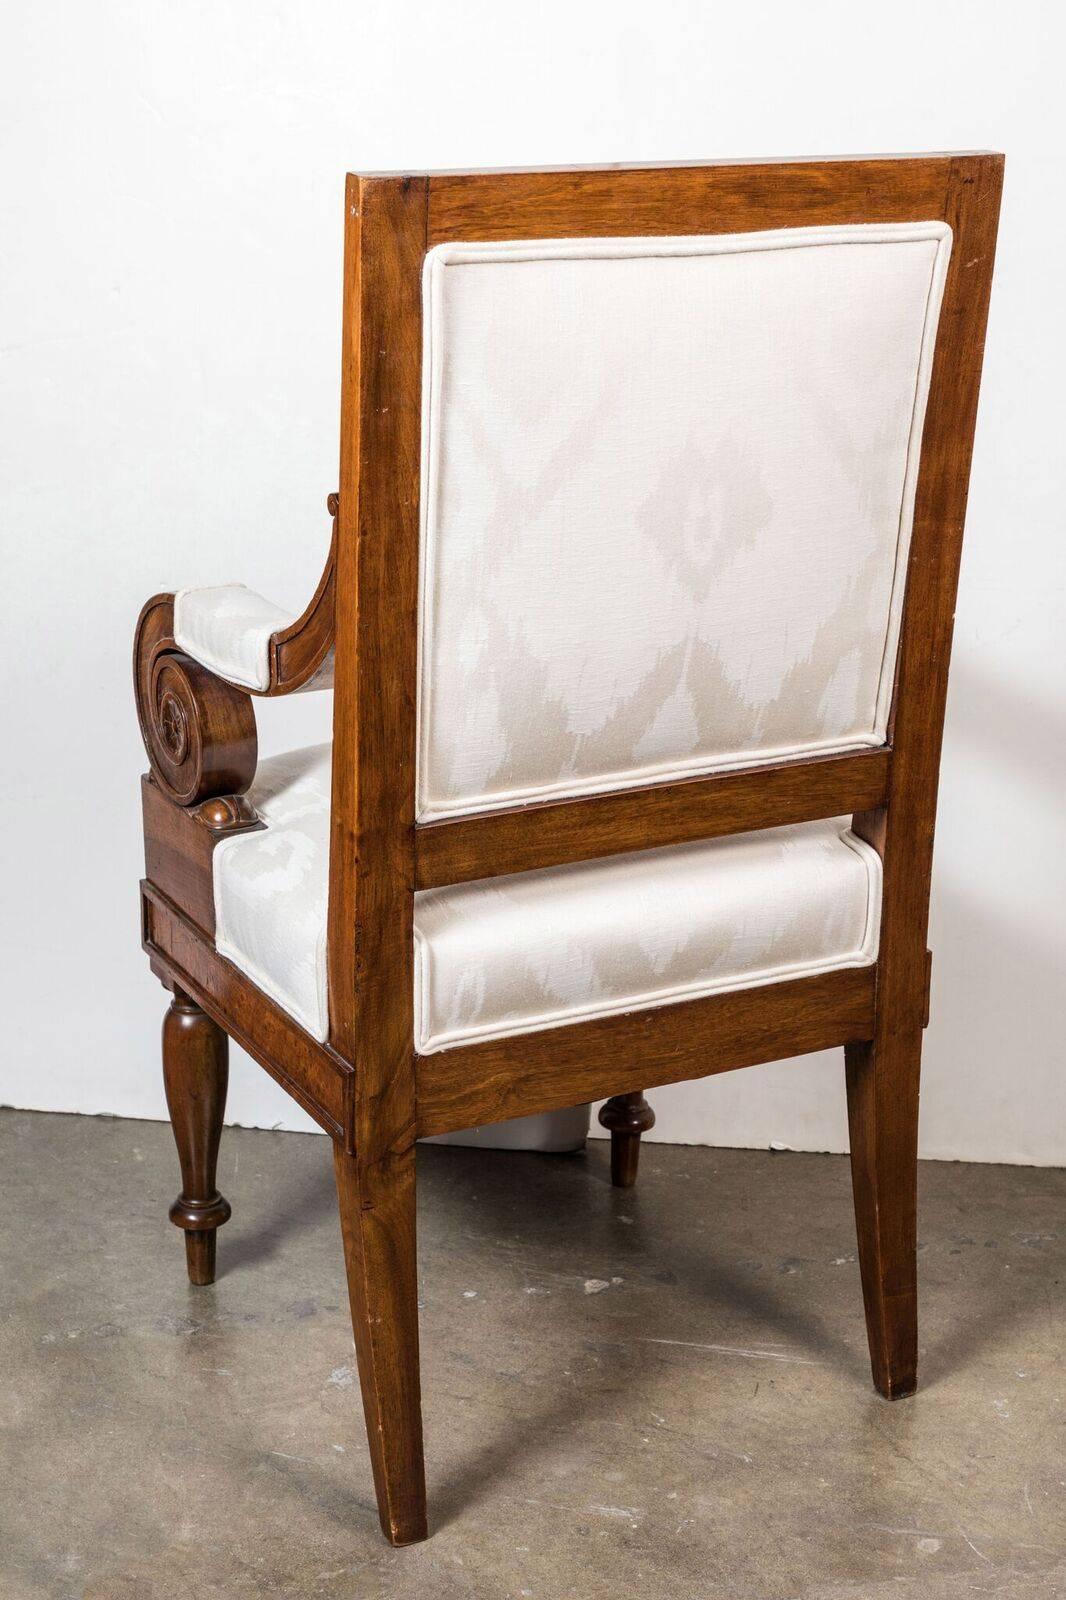 Scroll Arm, Naples Chairs, circa 1920 In Excellent Condition For Sale In Newport Beach, CA